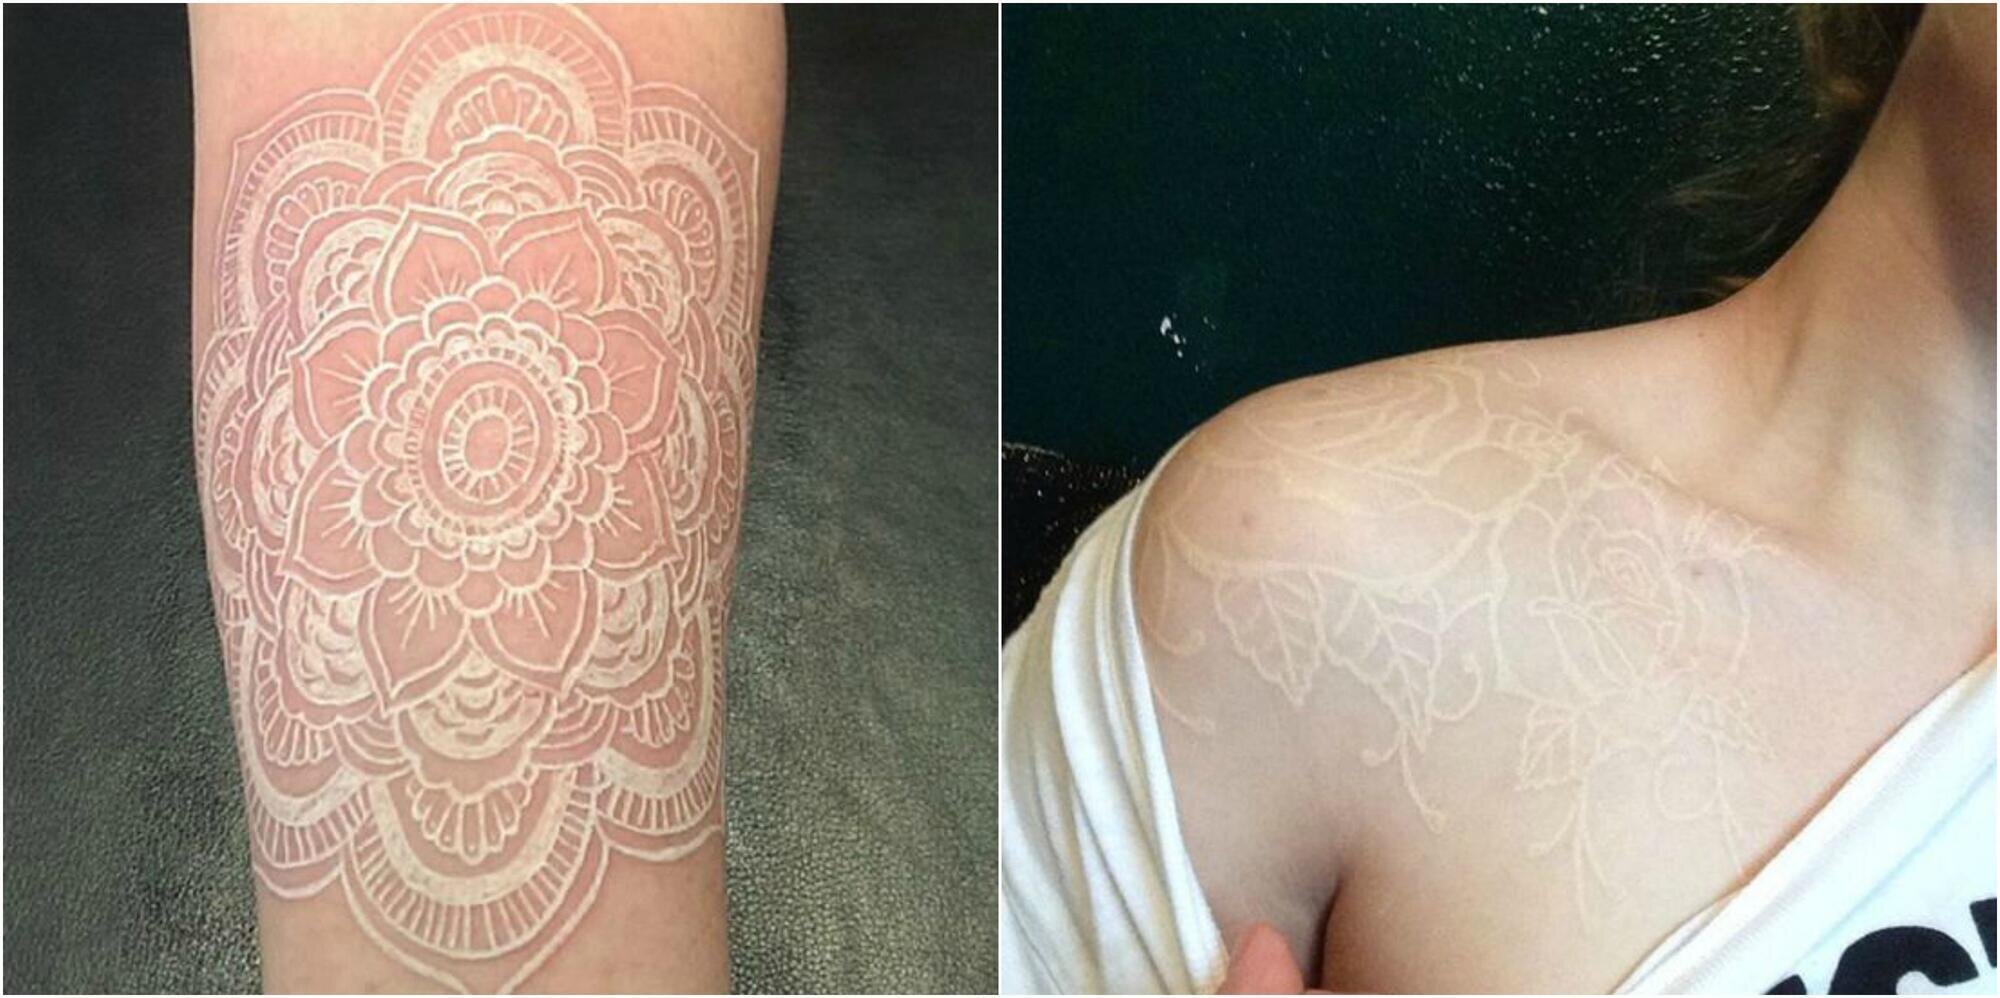 6 Facts You Need To Know Before Getting A White Tattoo - Cultura Colectiva